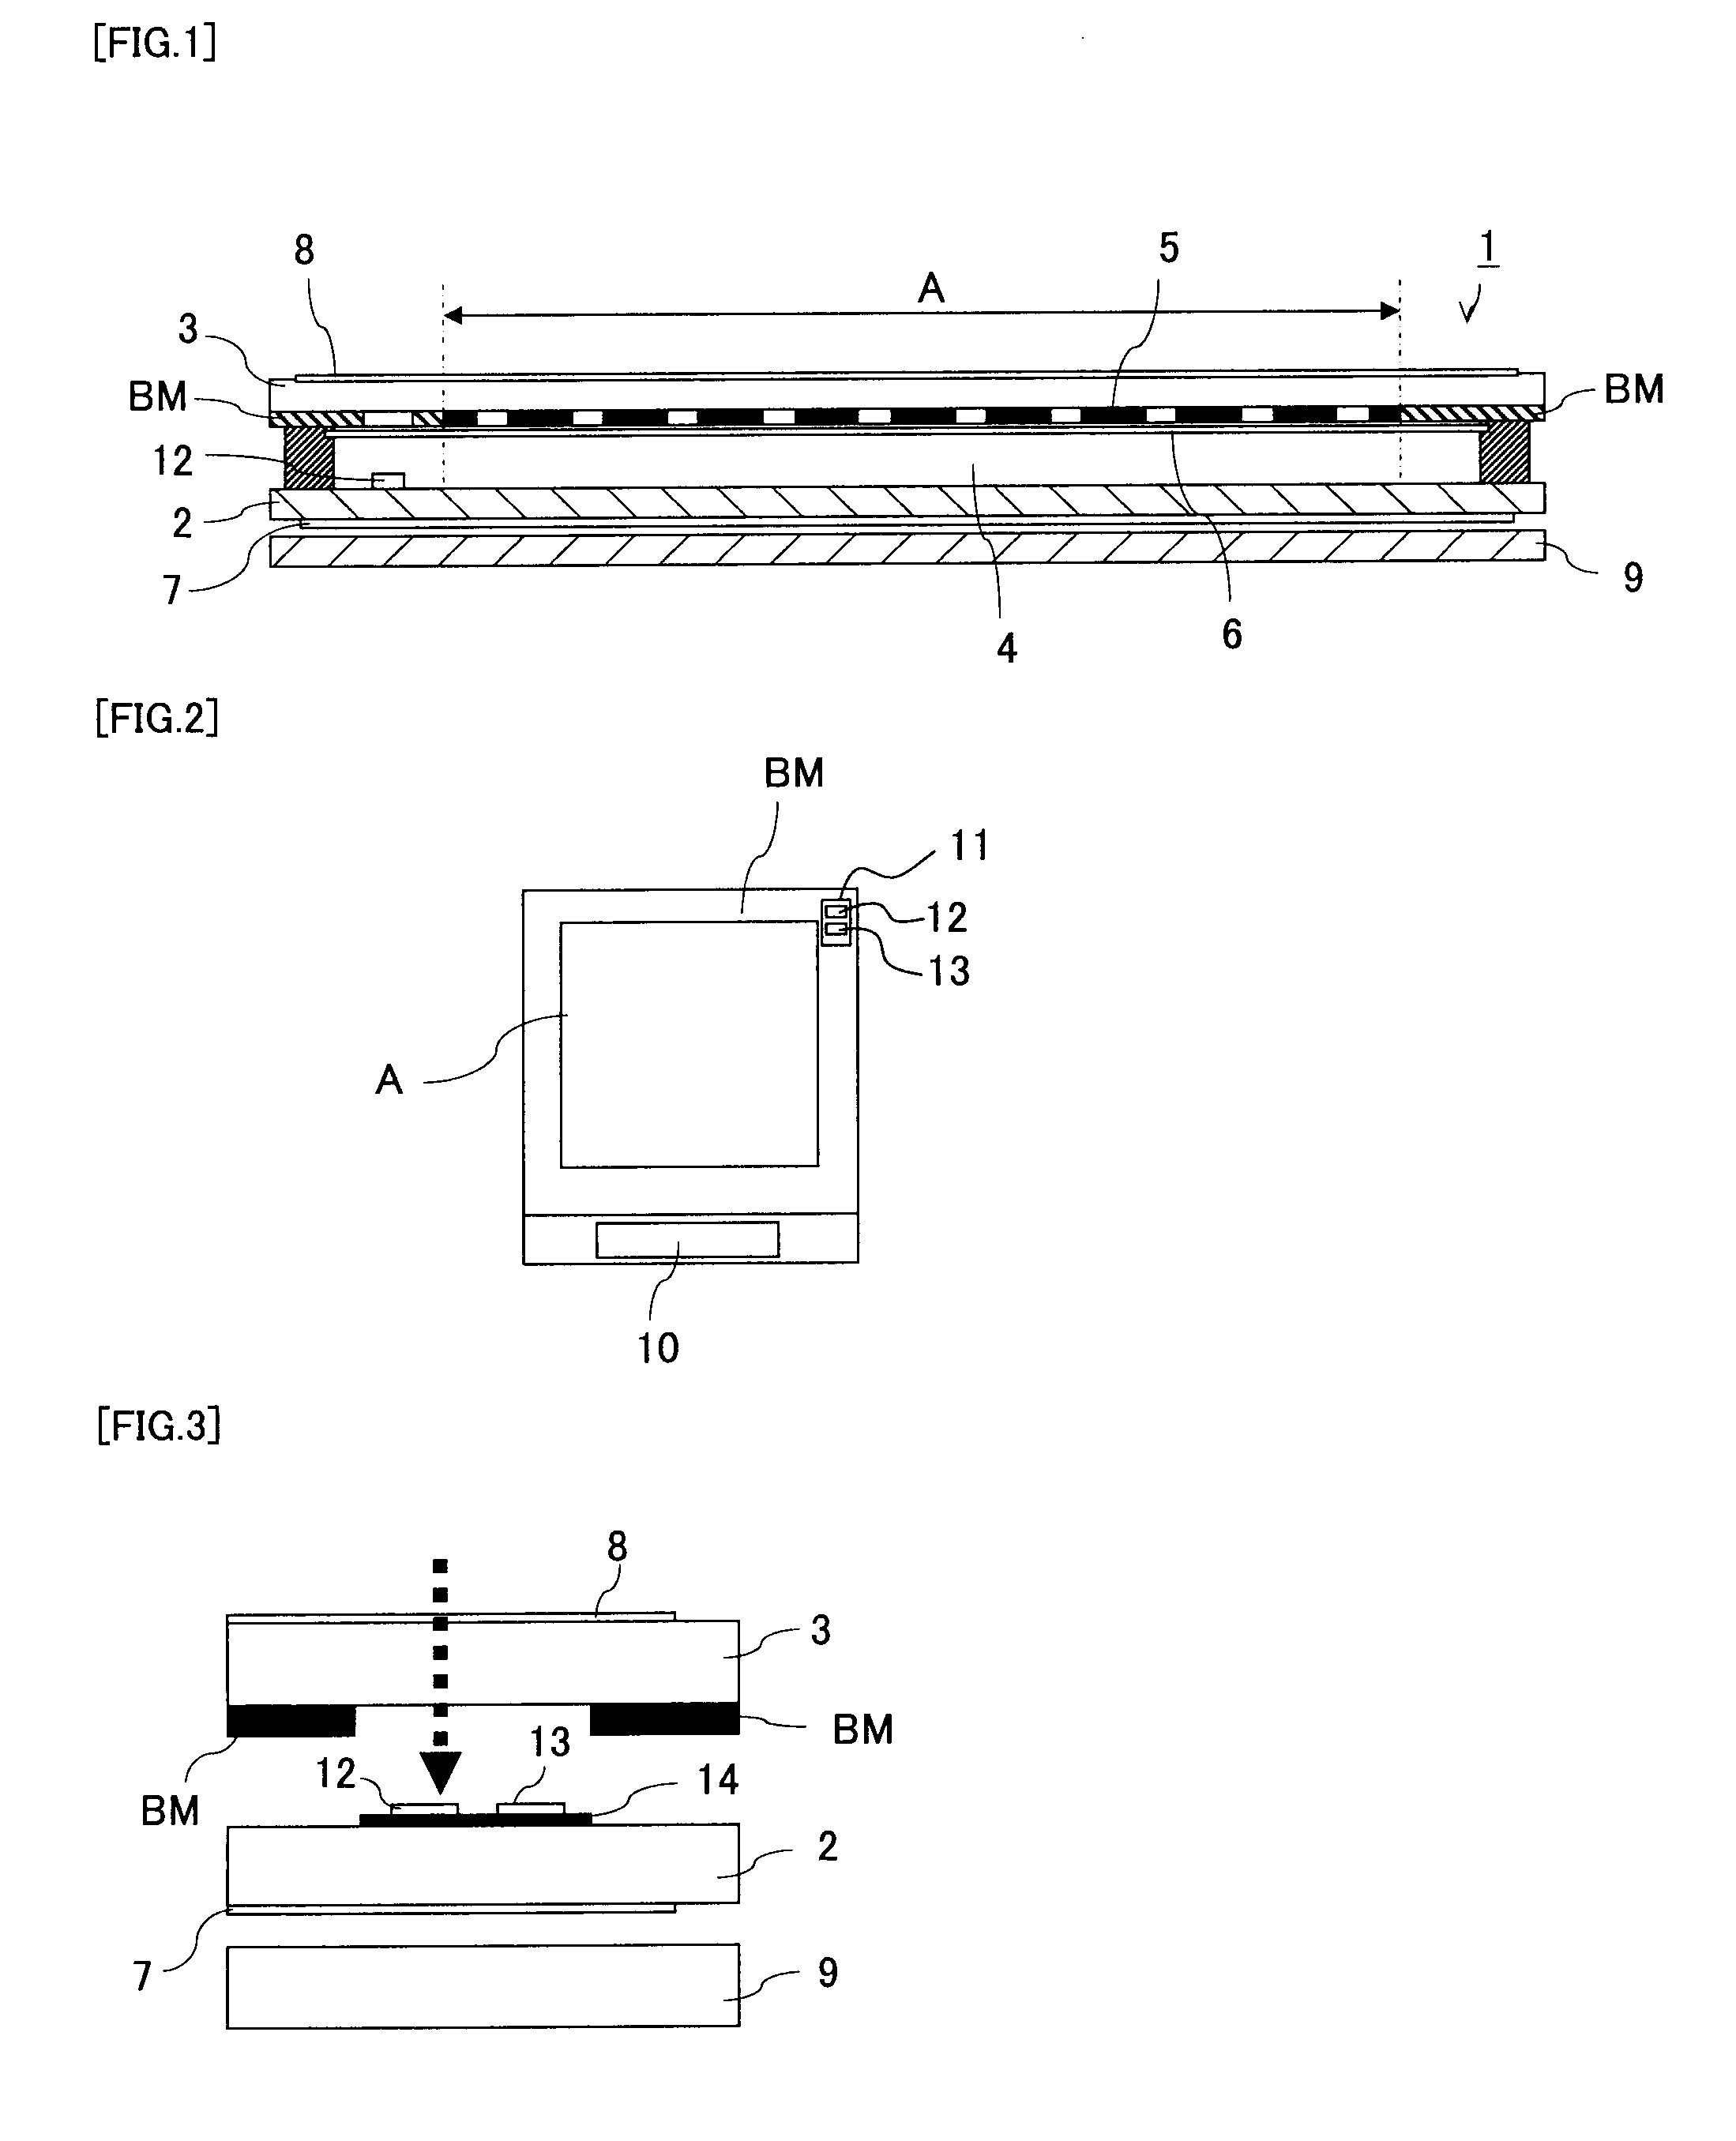 Display device and control method therefor